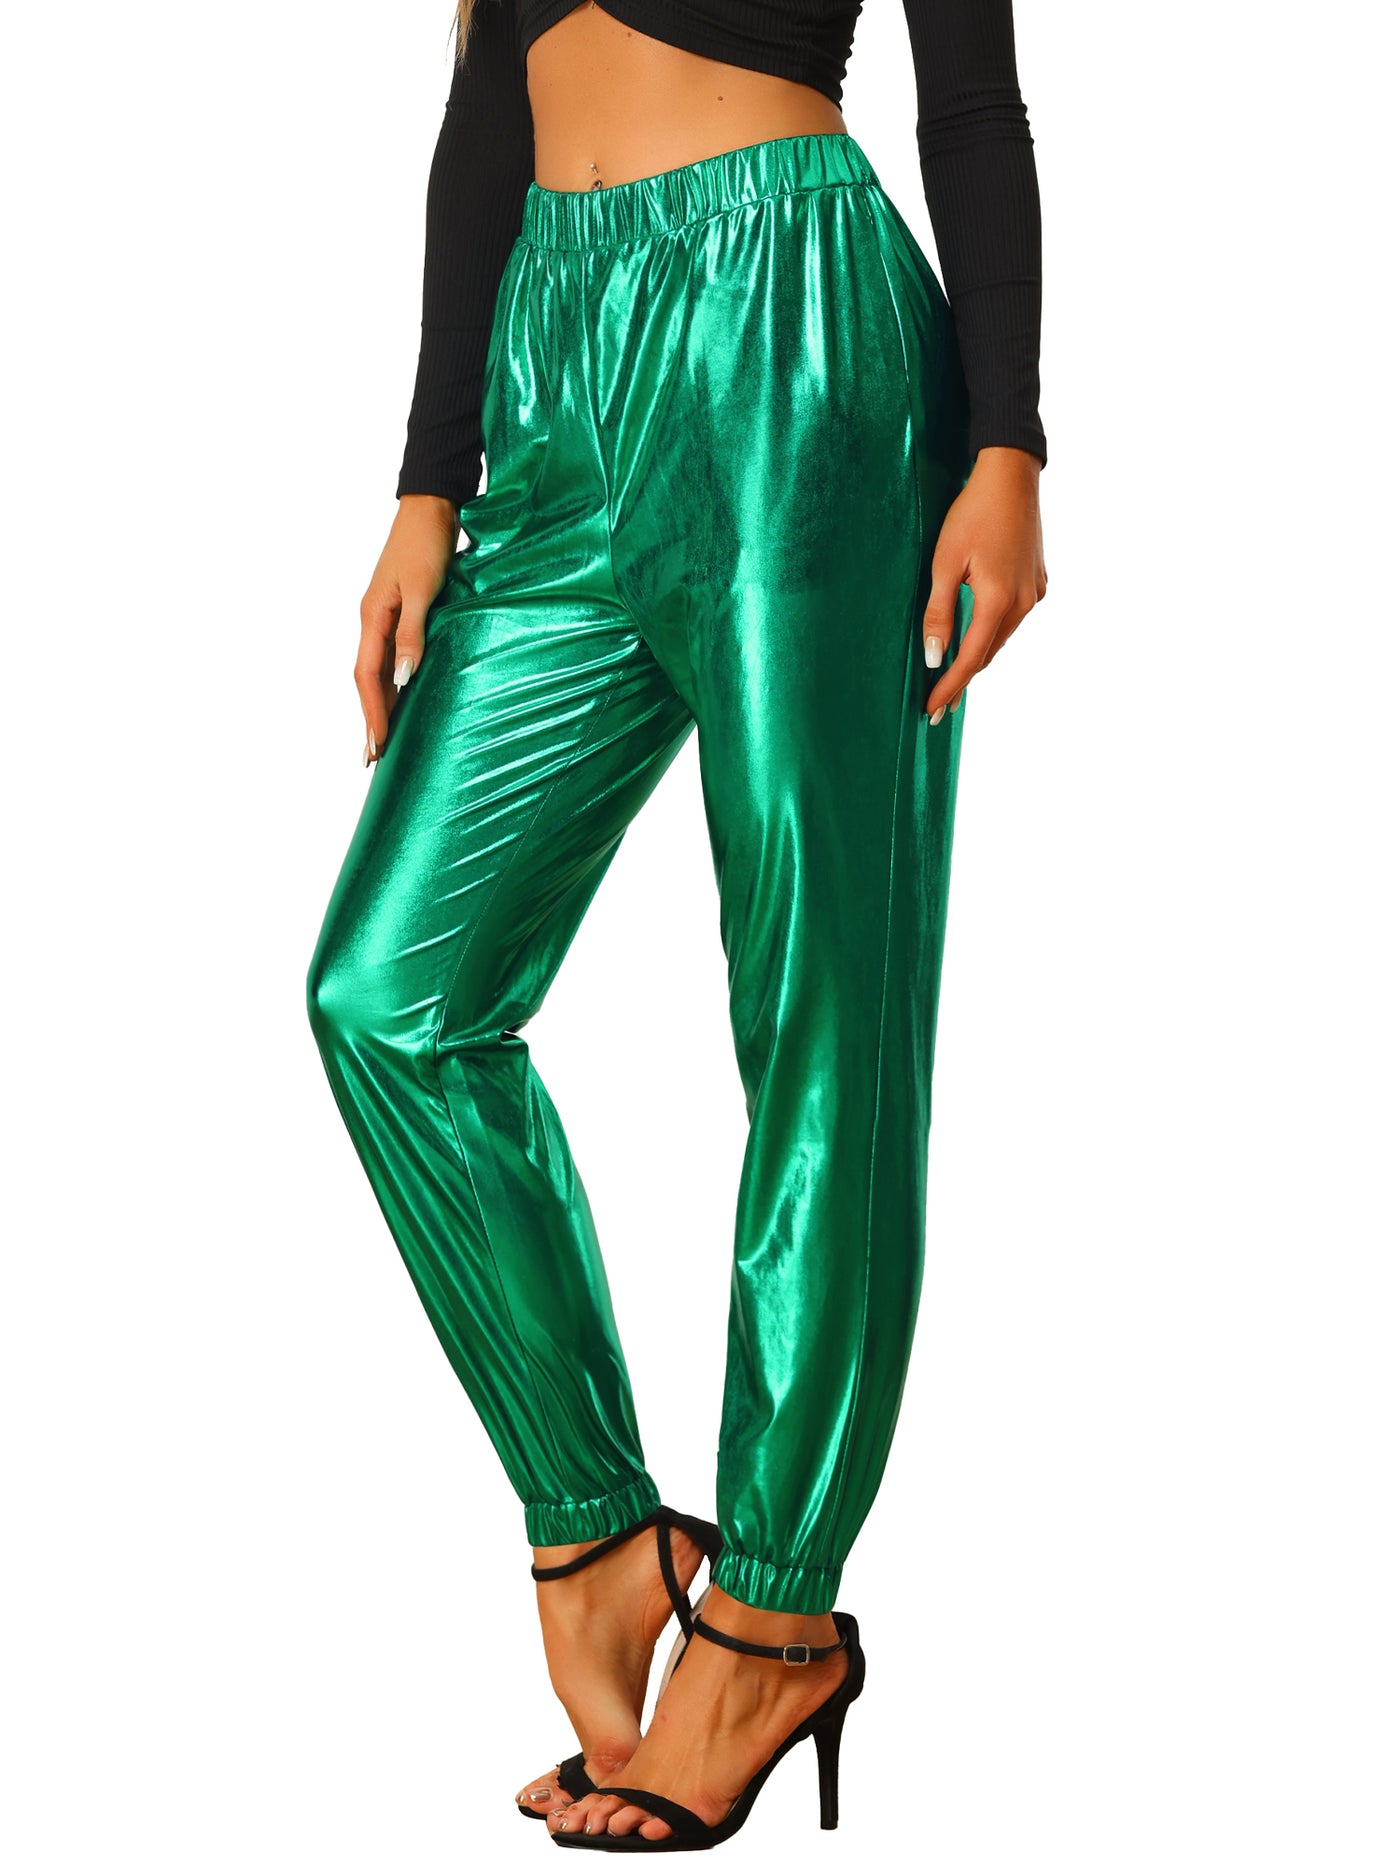 Womens Shiny Metallic Tights Pants Holographic High Waisted Stretch  Trousers